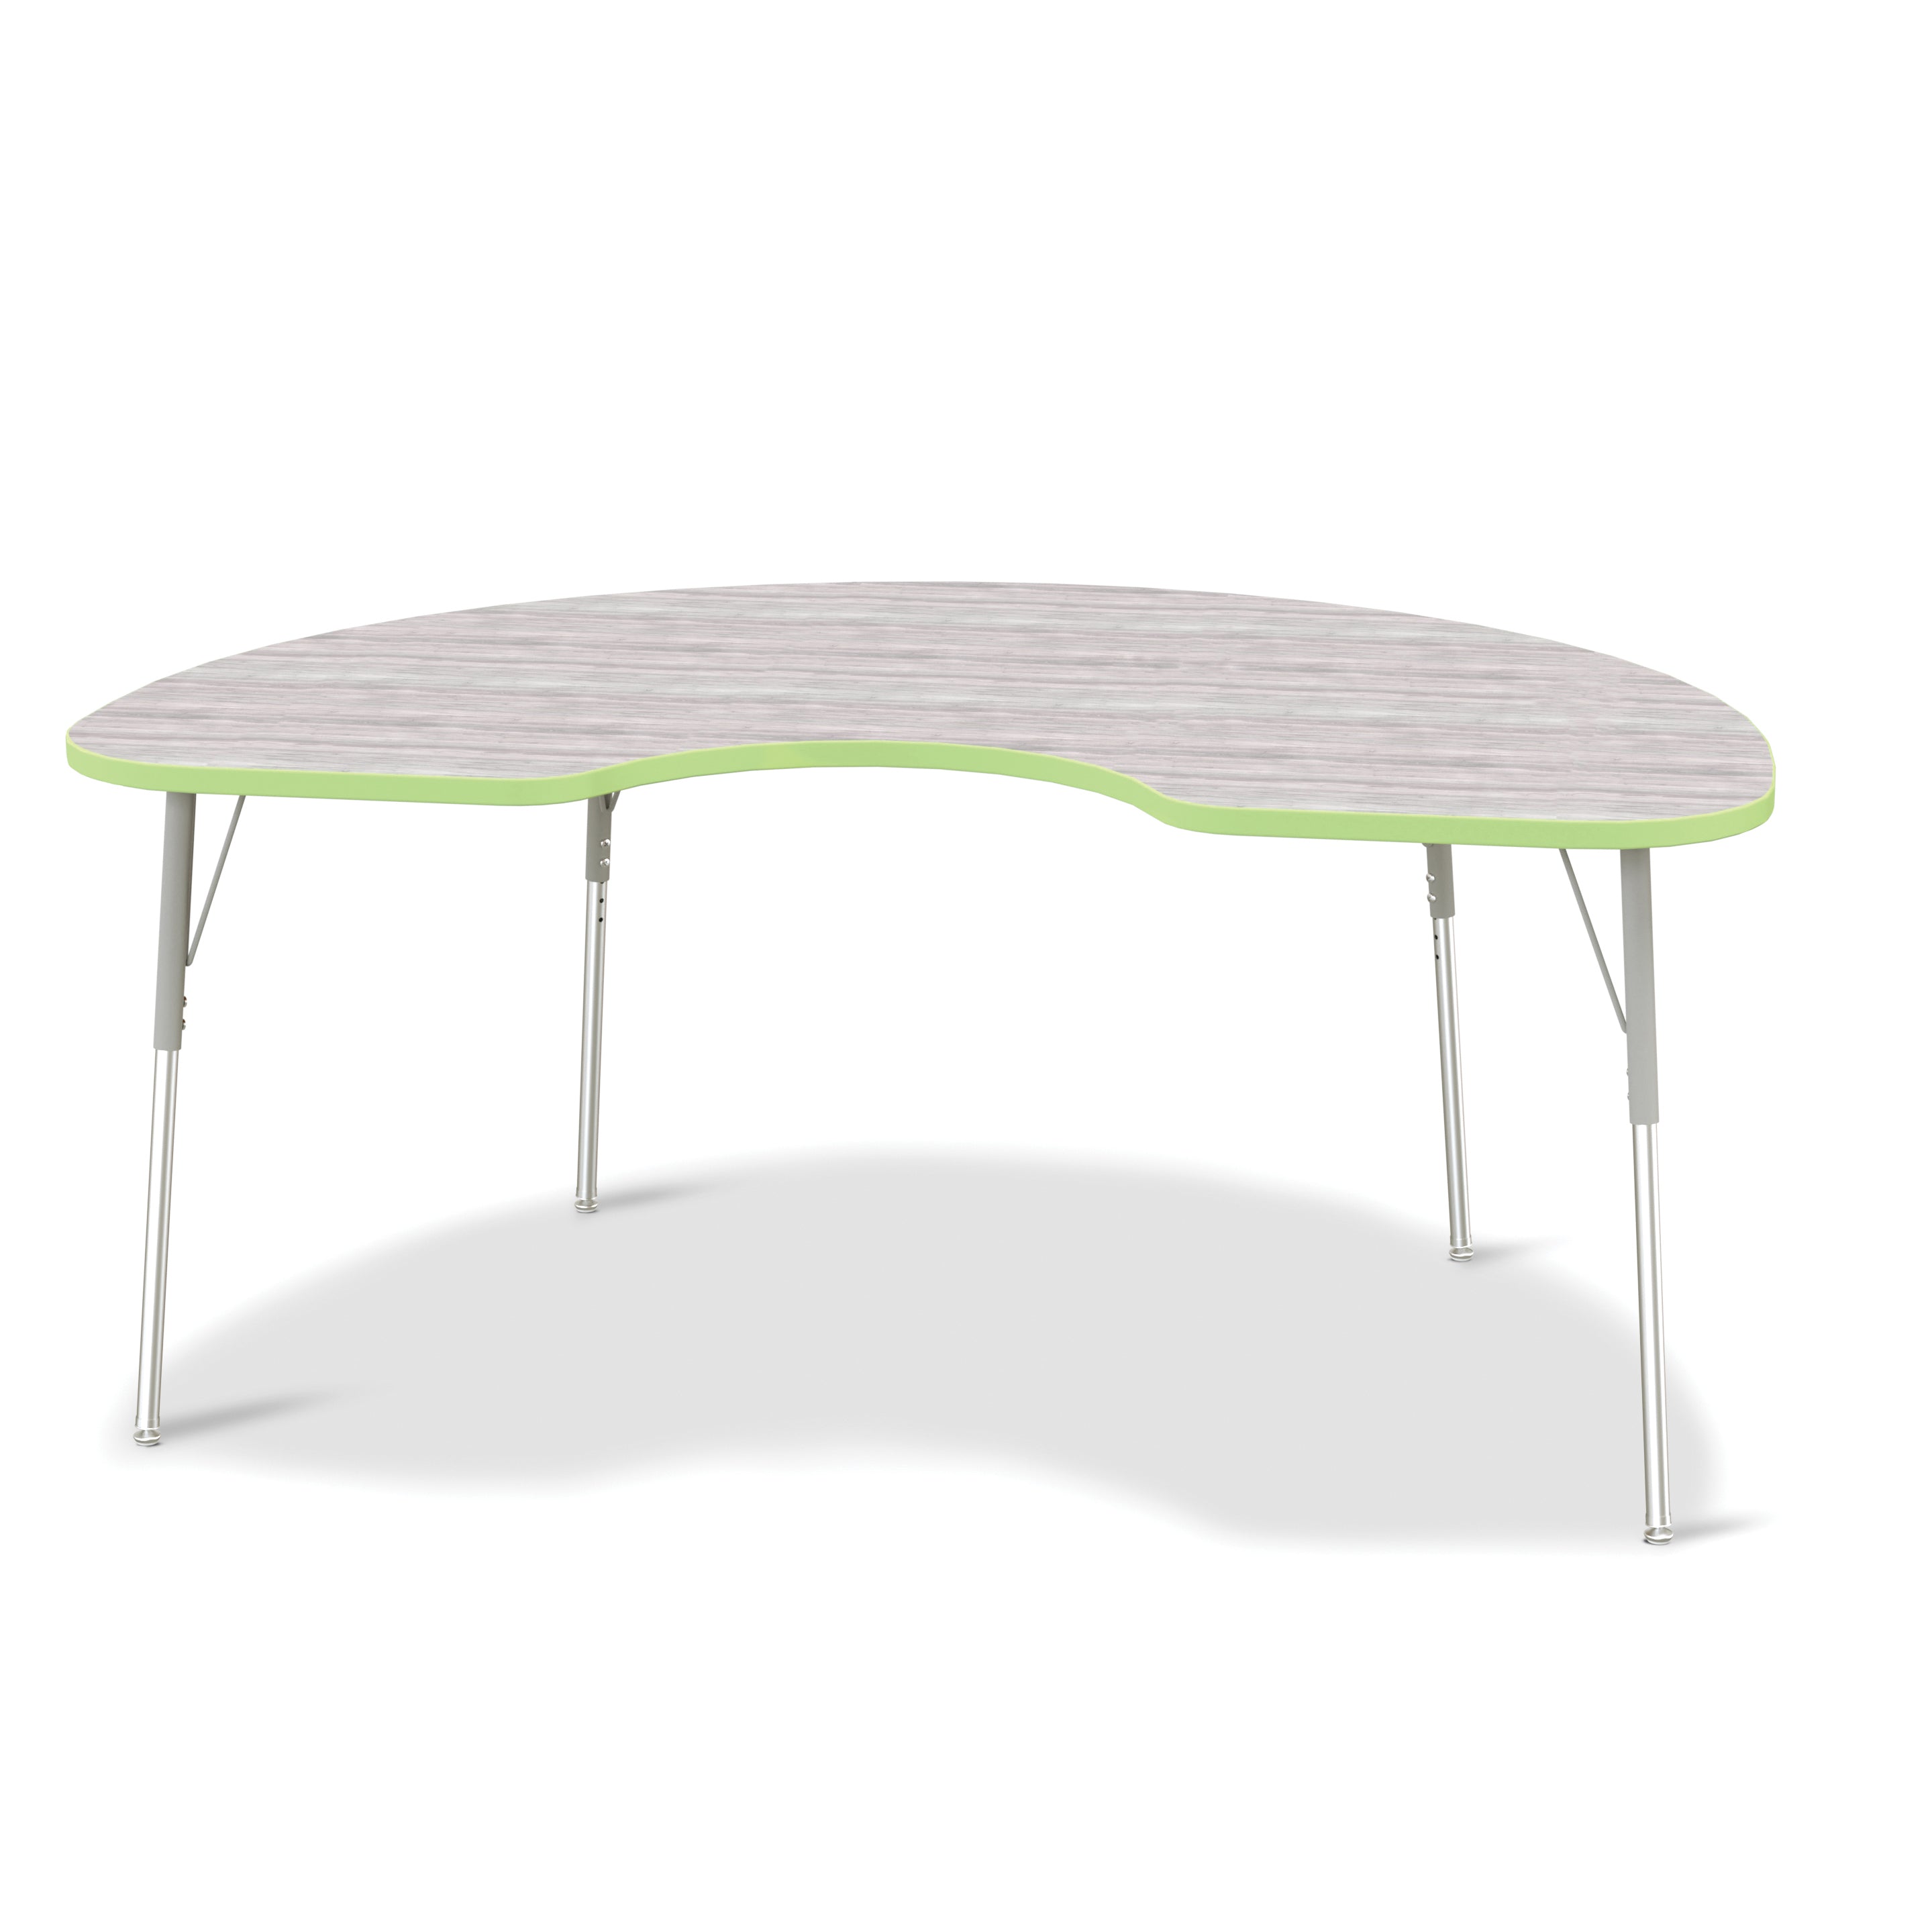 6423JCA451, Berries Kidney Activity Table - 48" X 72", A-height - Driftwood Gray/Key Lime/Gray